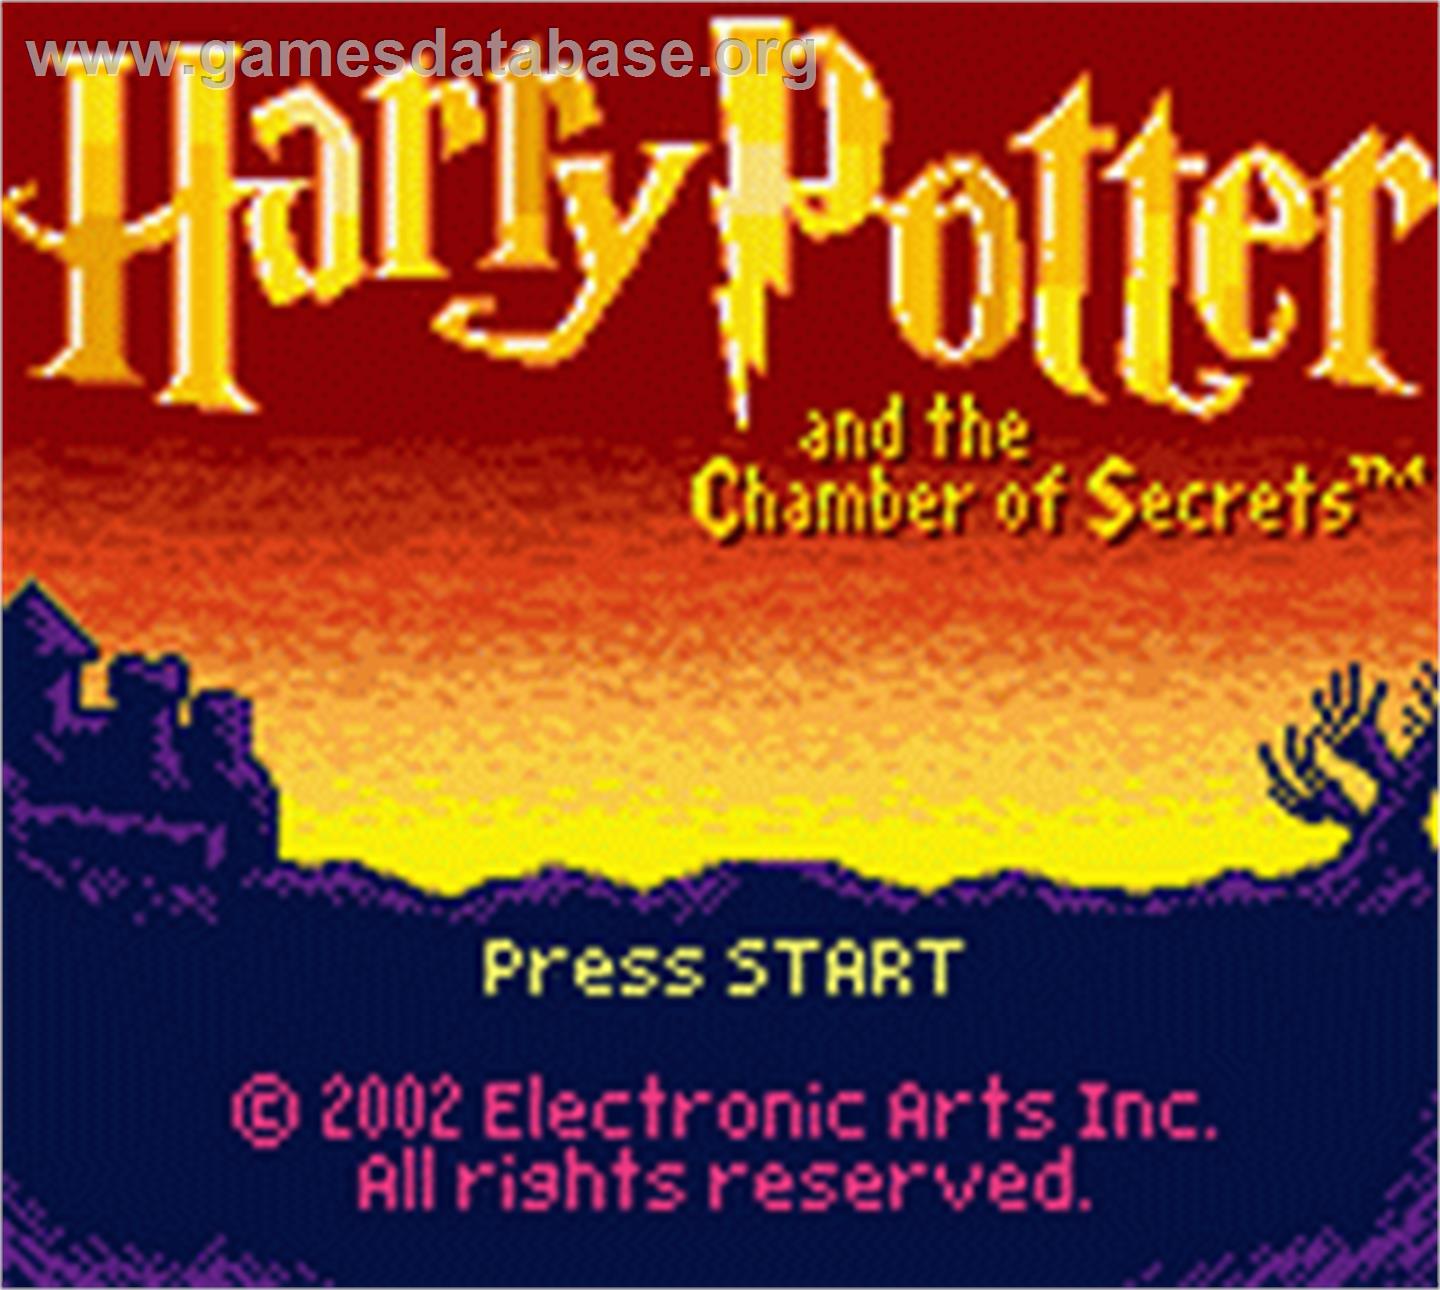 harry potter and the chamber of secrets title